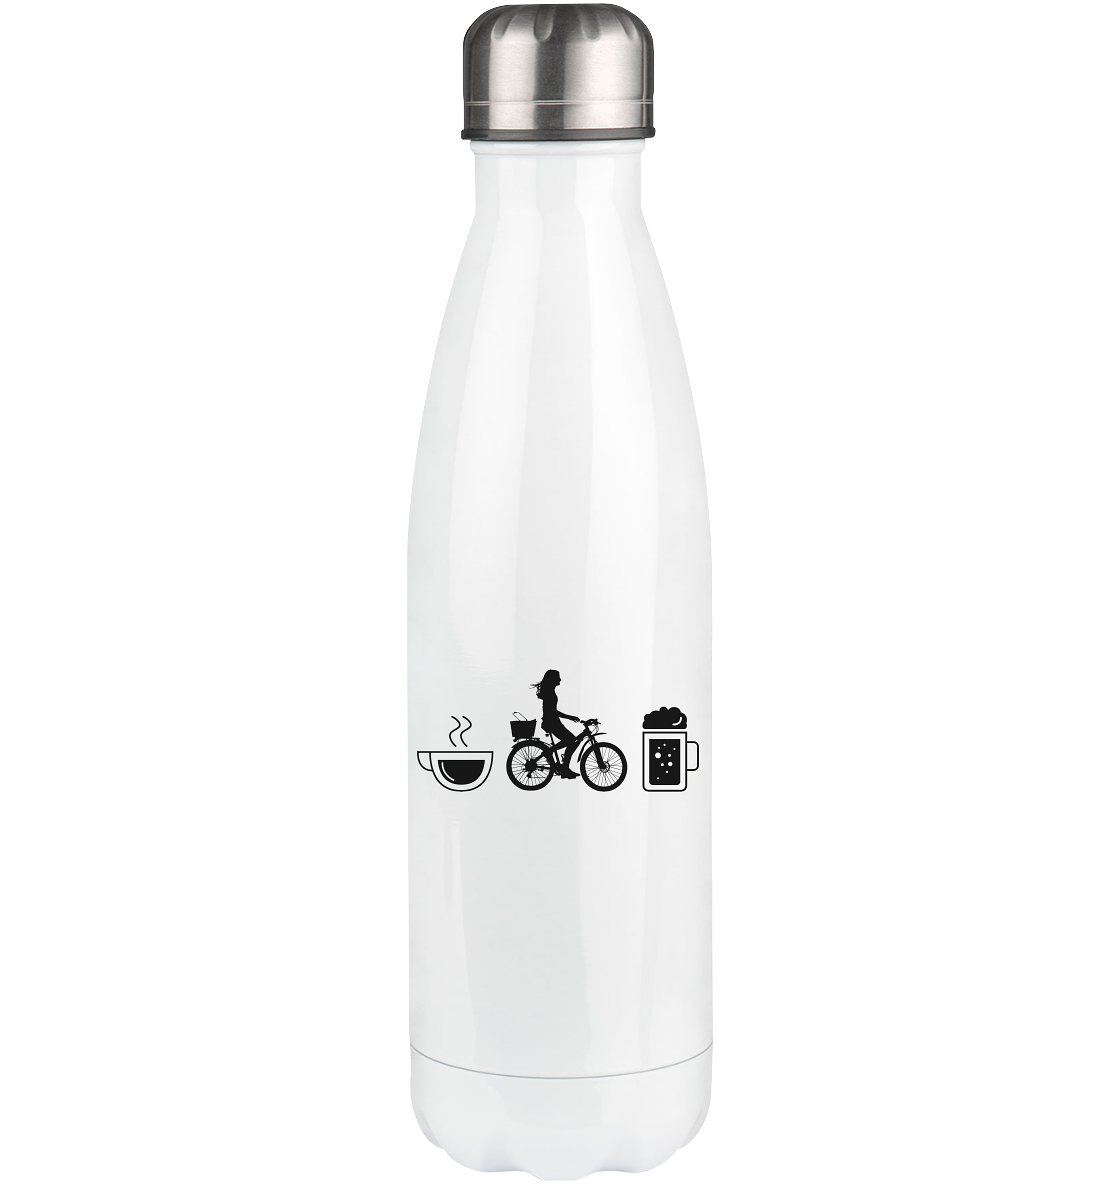 Coffee Beer and Cycling - Edelstahl Thermosflasche fahrrad 500ml